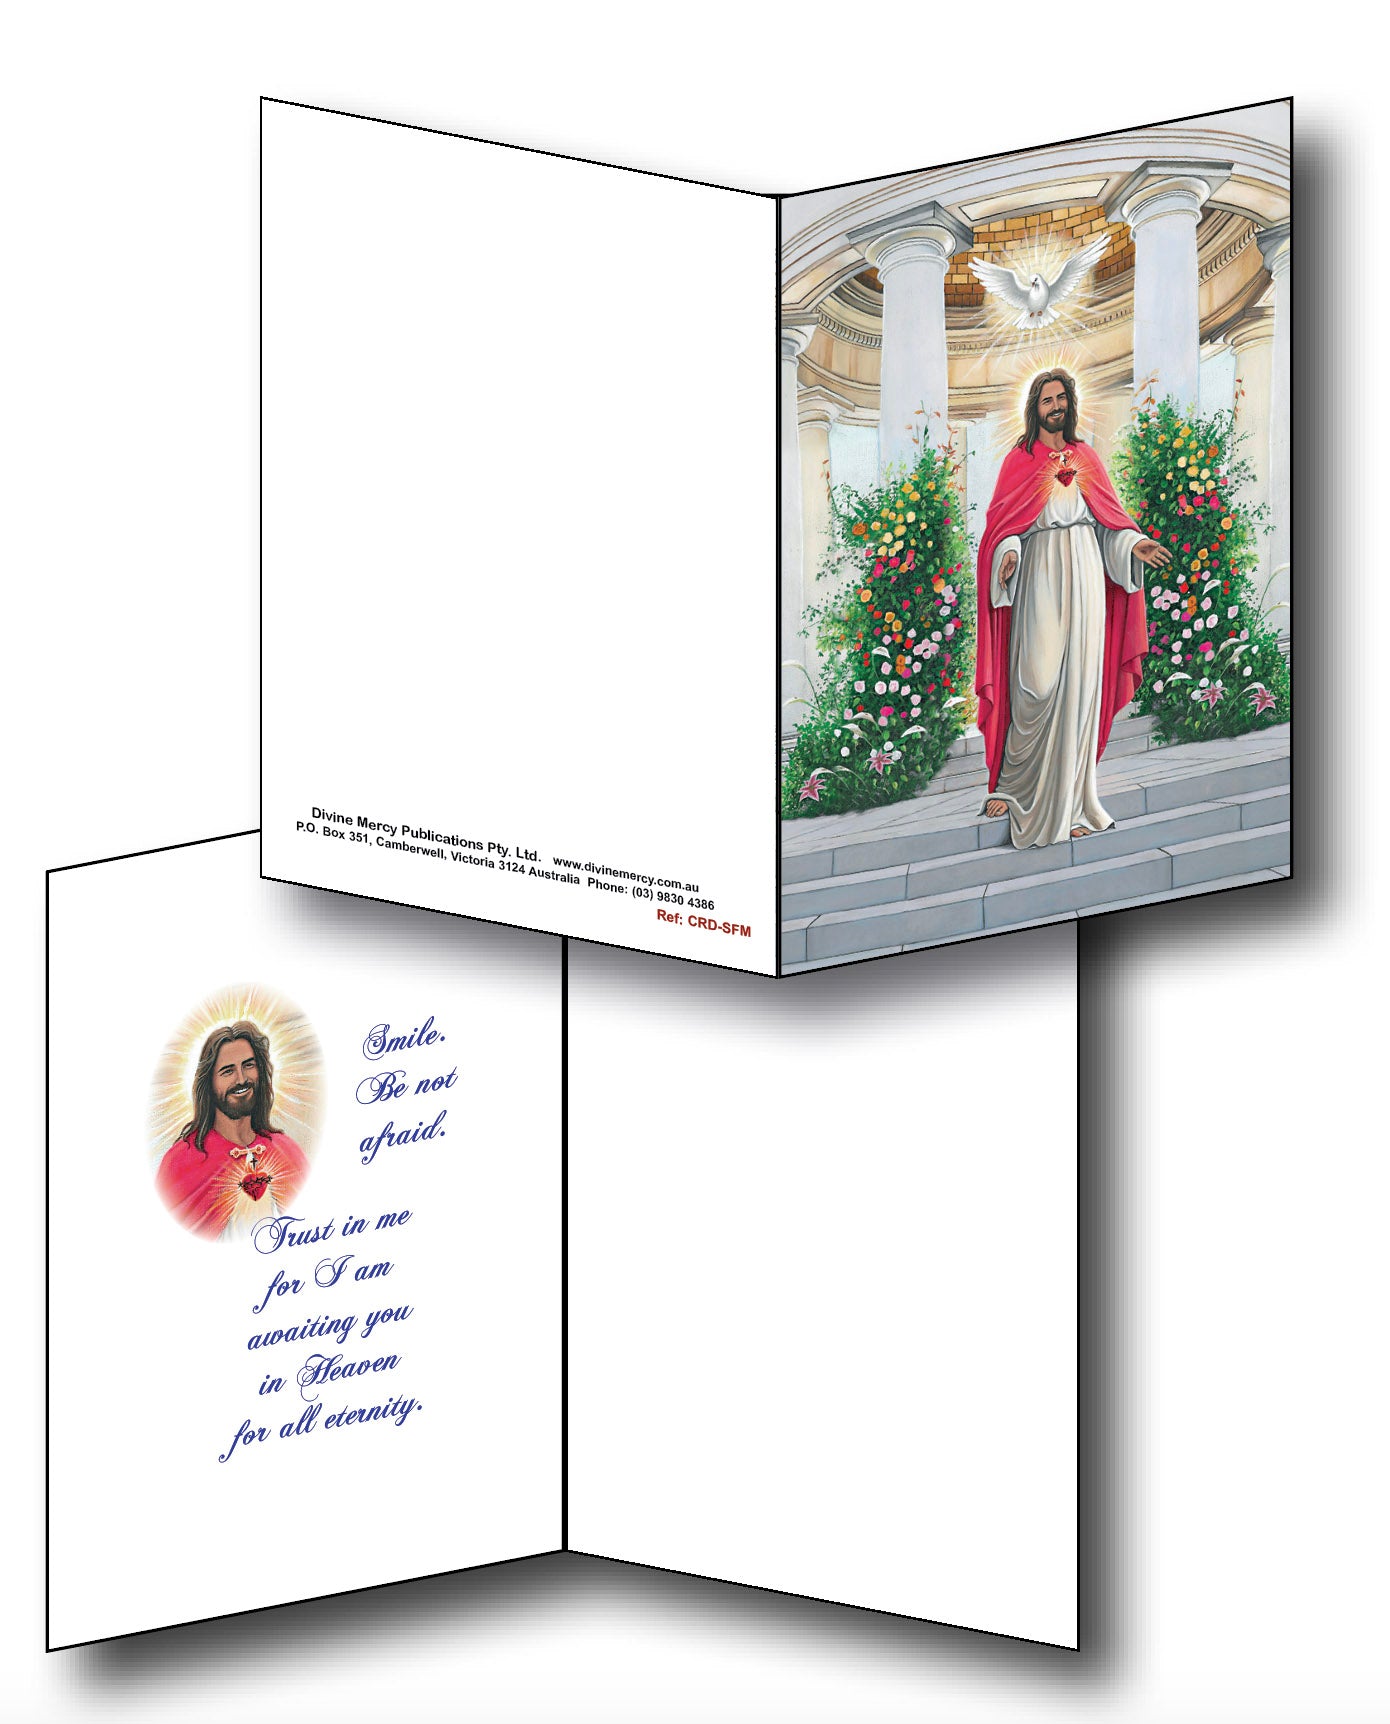 Smiles from Heaven Greeting Card